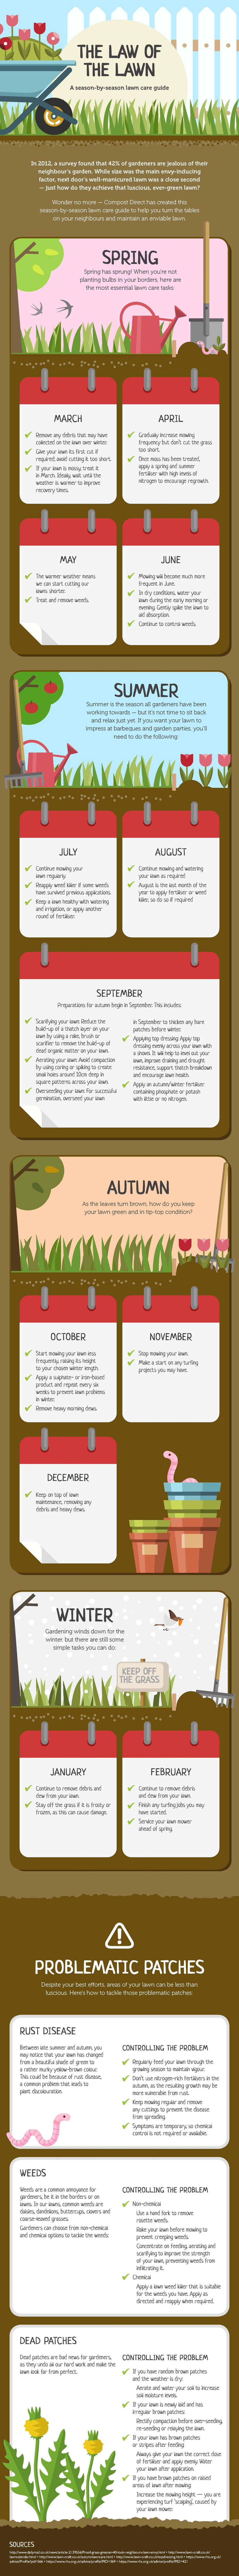 Law of the Lawn - infographic from Compost Direct